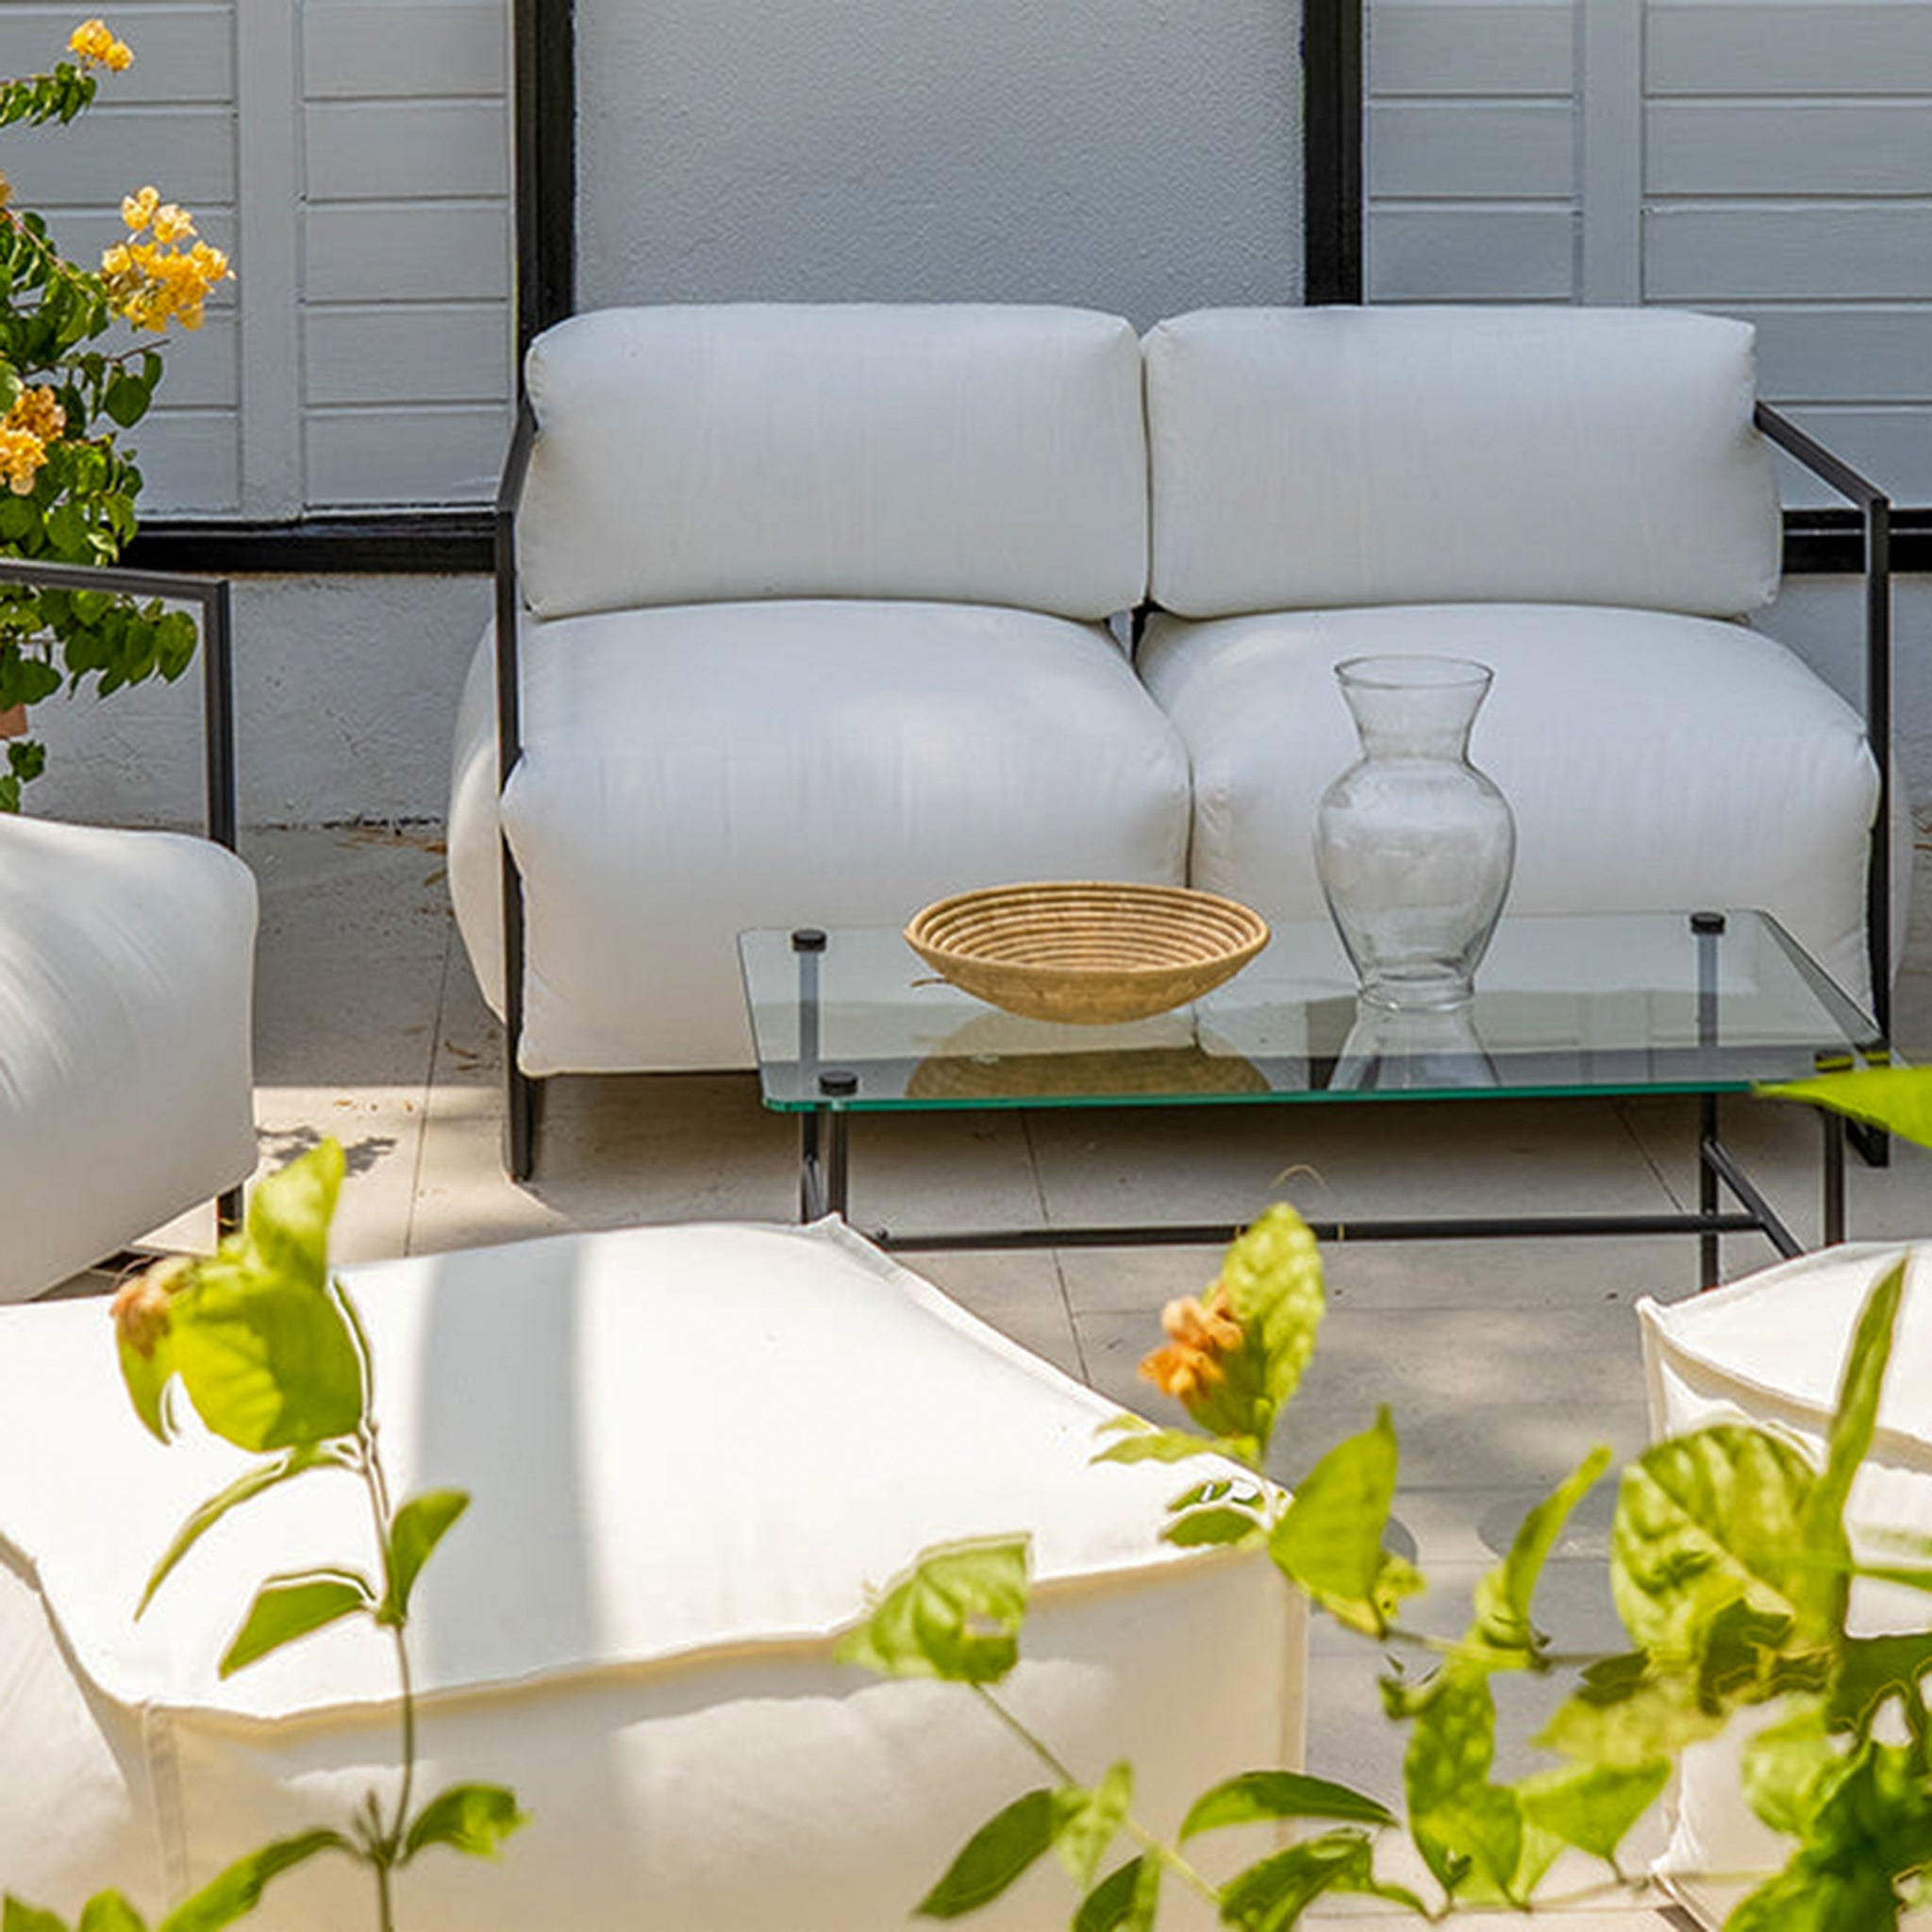 Bring comfort to your patio with the Dexter three-seater outdoor sofa. Built with a steel frame and weatherproof fabric for lasting enjoyment.